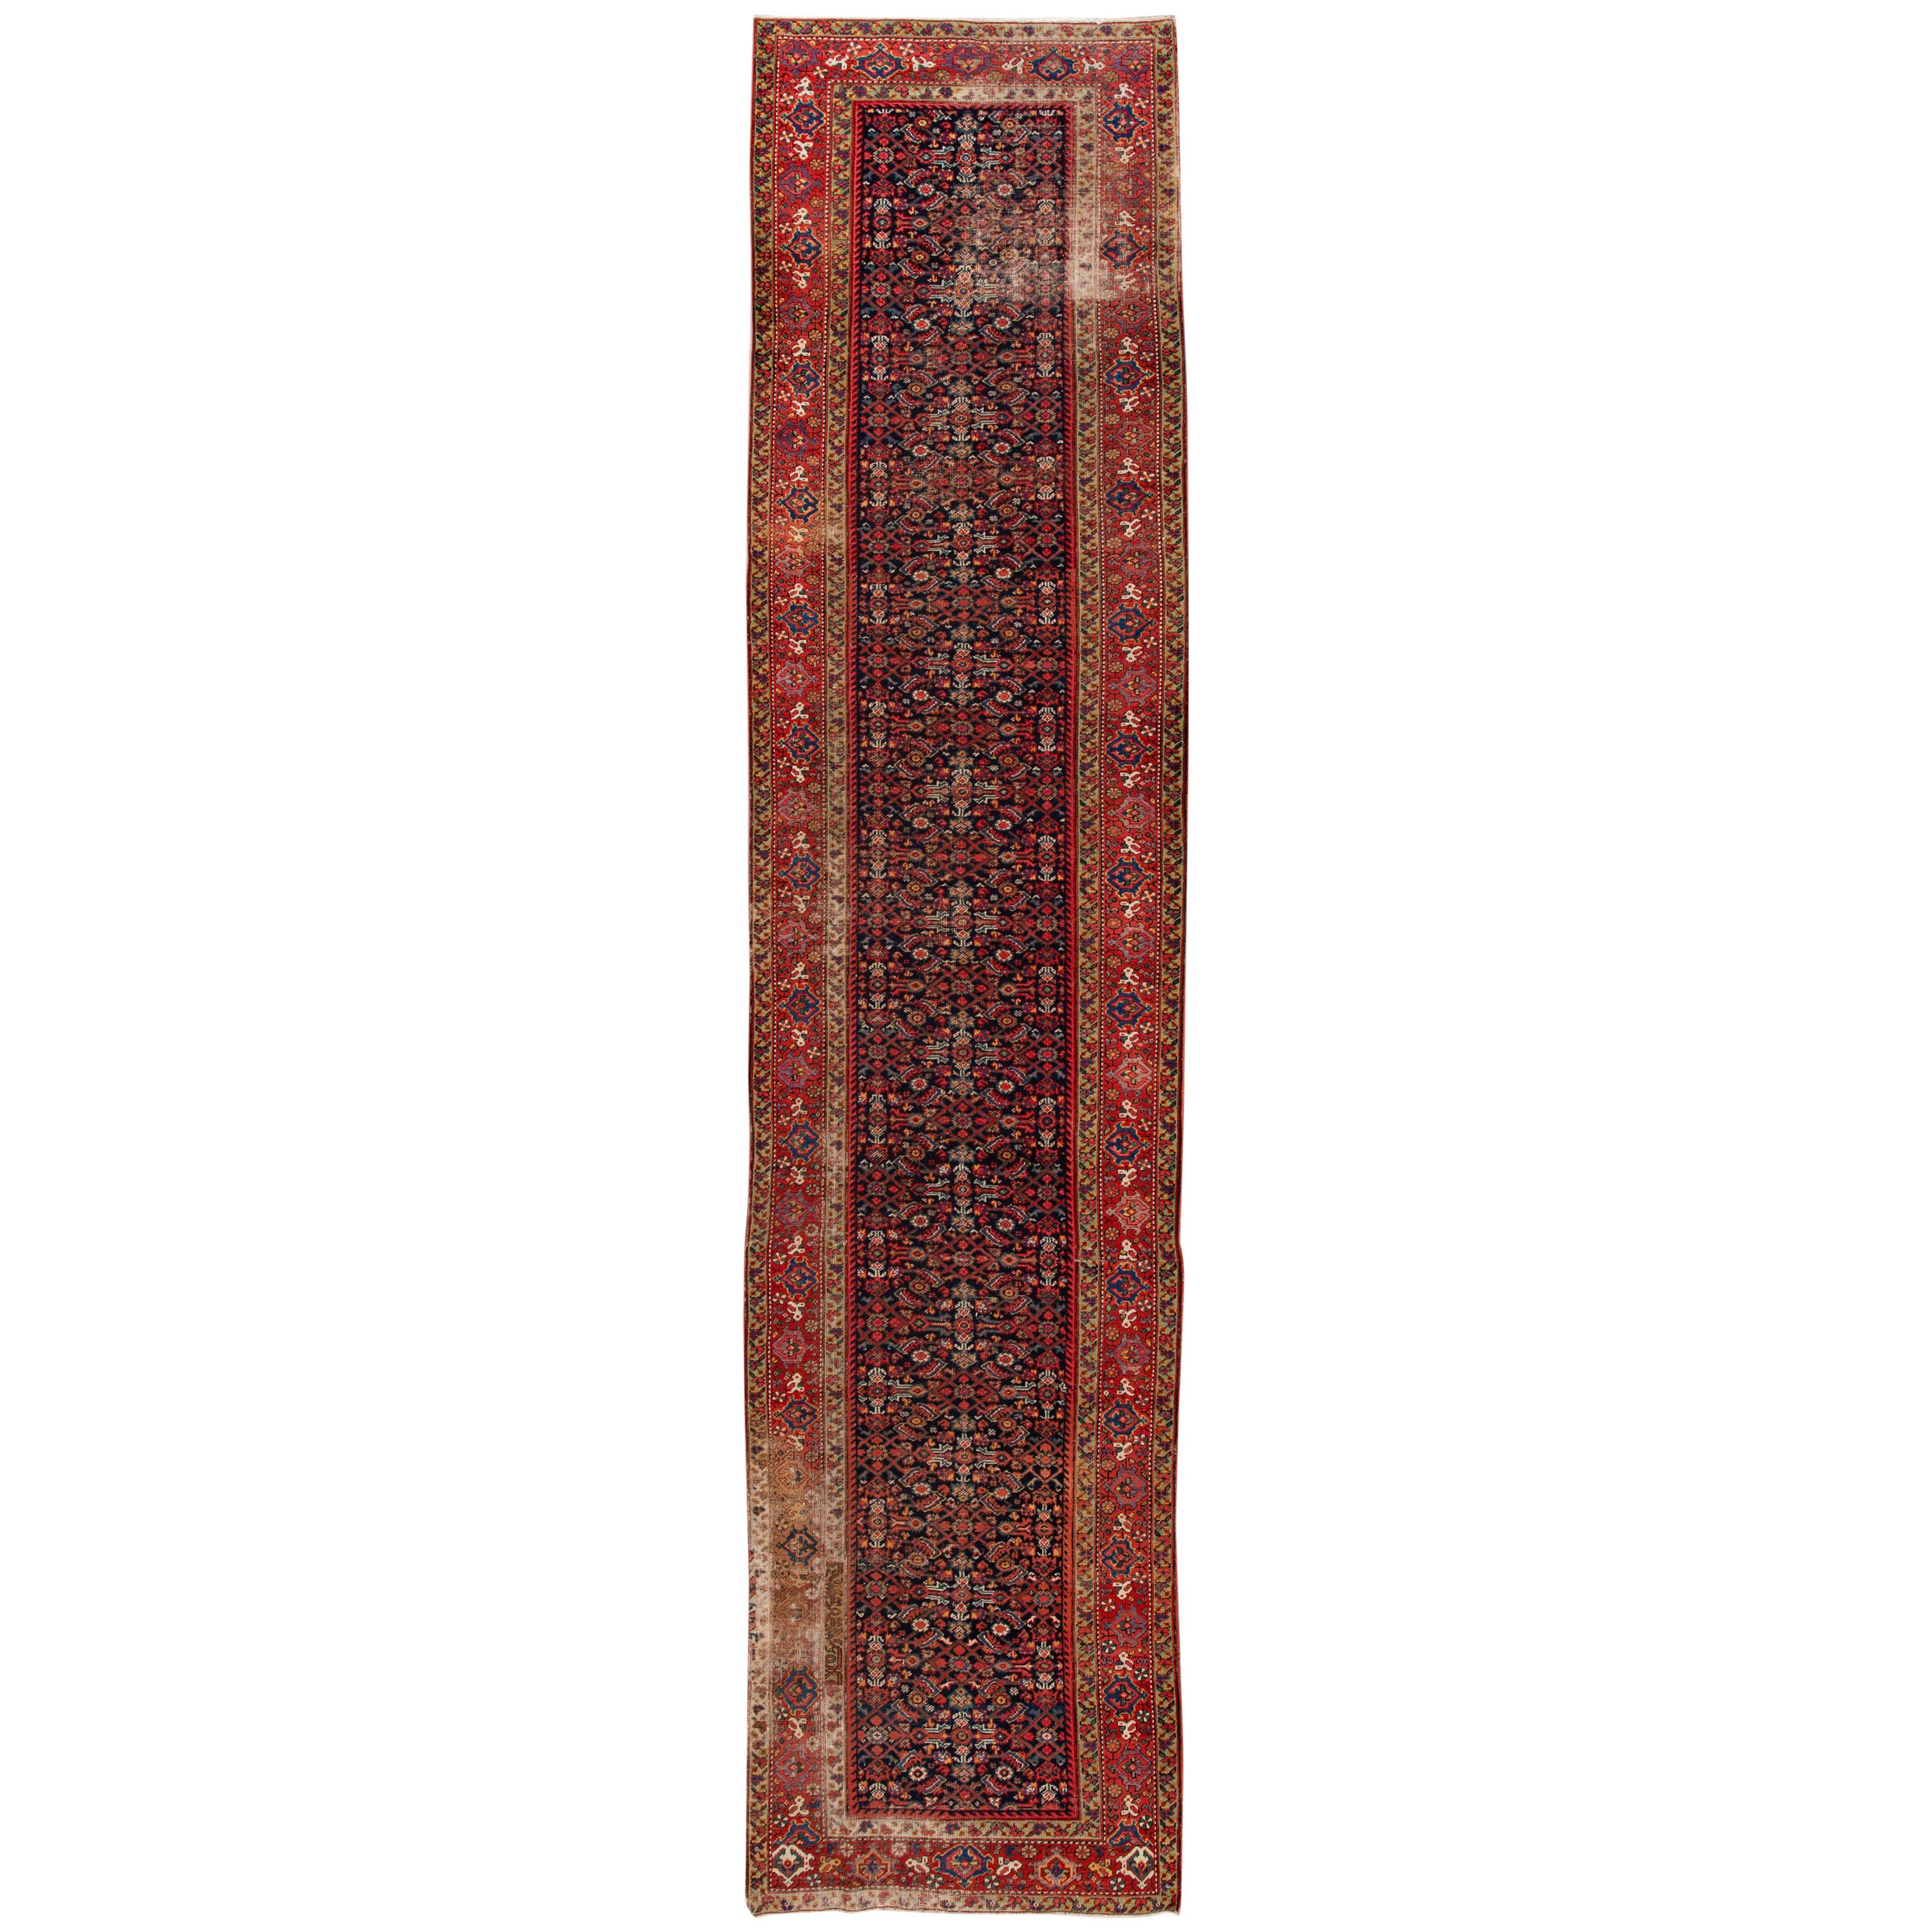 Early 20th Century Antique Distressed Malayer Wool Runner